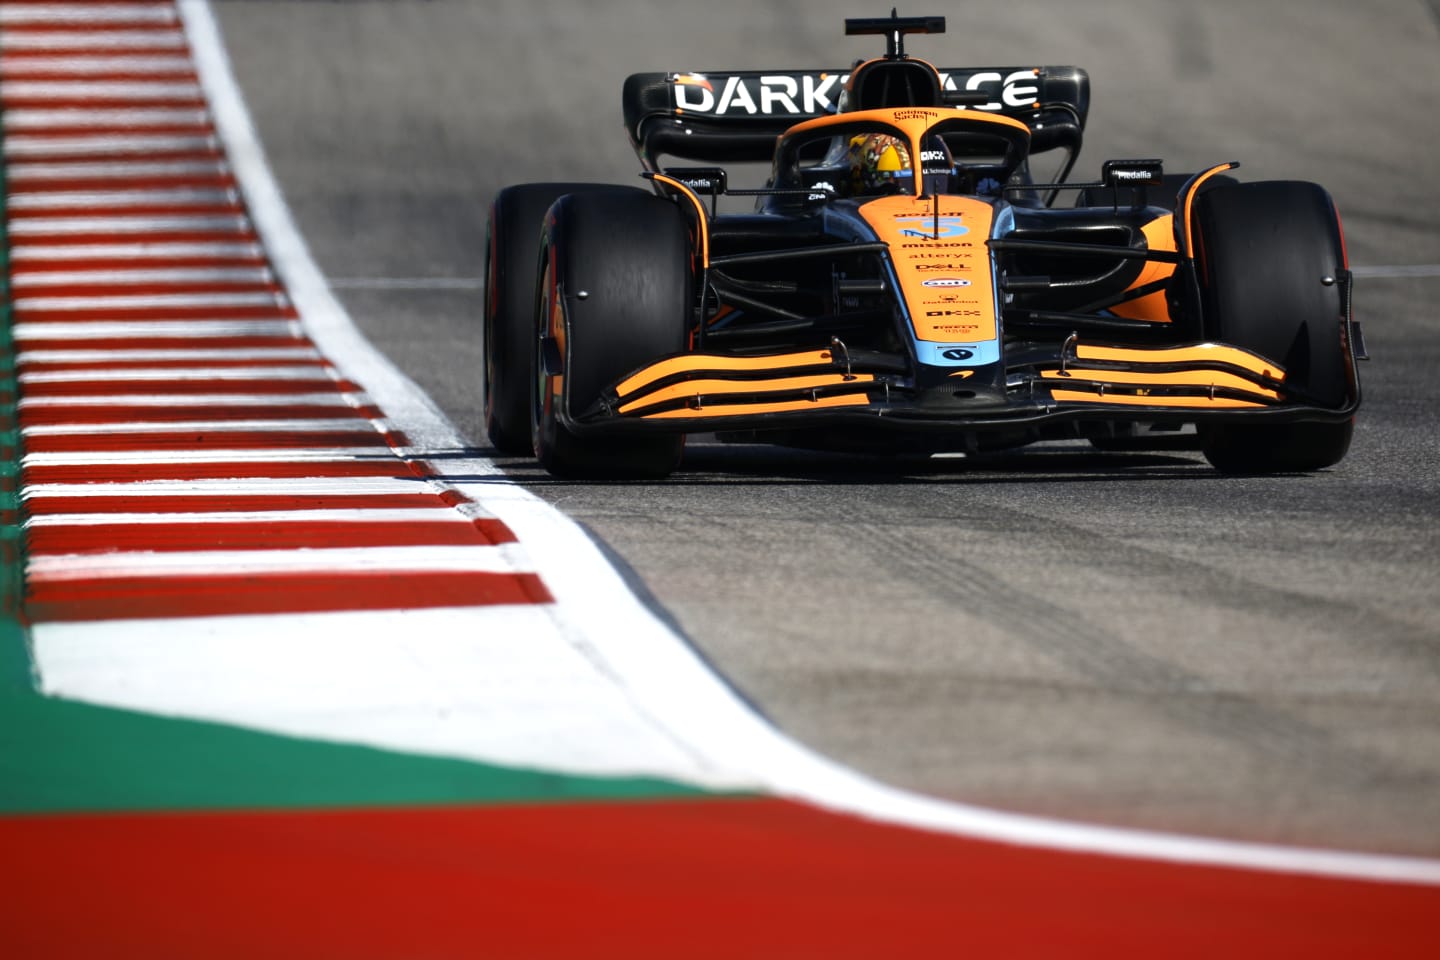 AUSTIN, TEXAS - OCTOBER 22: Daniel Ricciardo of Australia driving the (3) McLaren MCL36 Mercedes on track during final practice ahead of the F1 Grand Prix of USA at Circuit of The Americas on October 22, 2022 in Austin, Texas. (Photo by Jared C. Tilton/Getty Images)